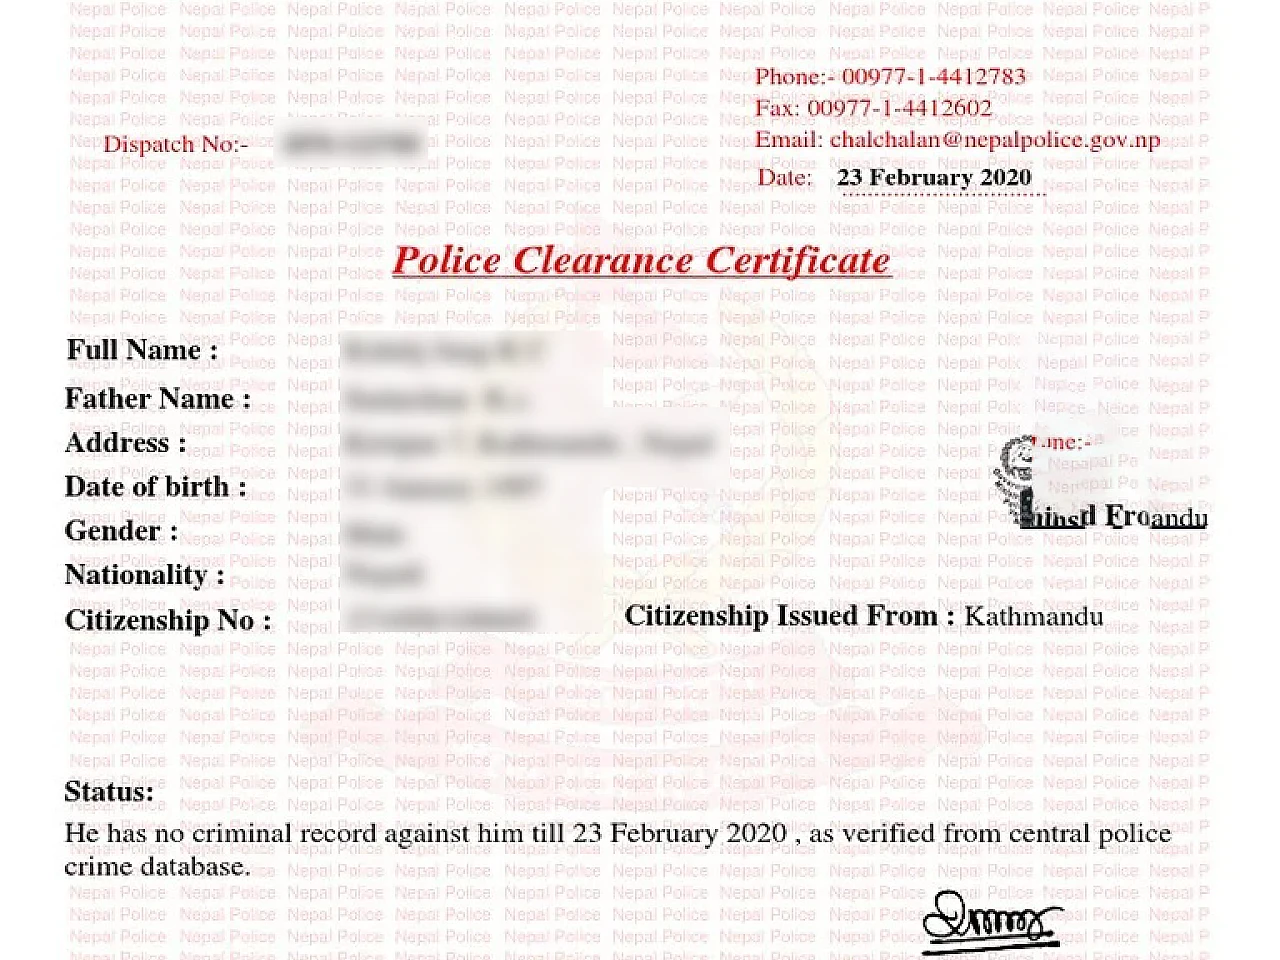 How to make Police Clearance Certificate in nepal?